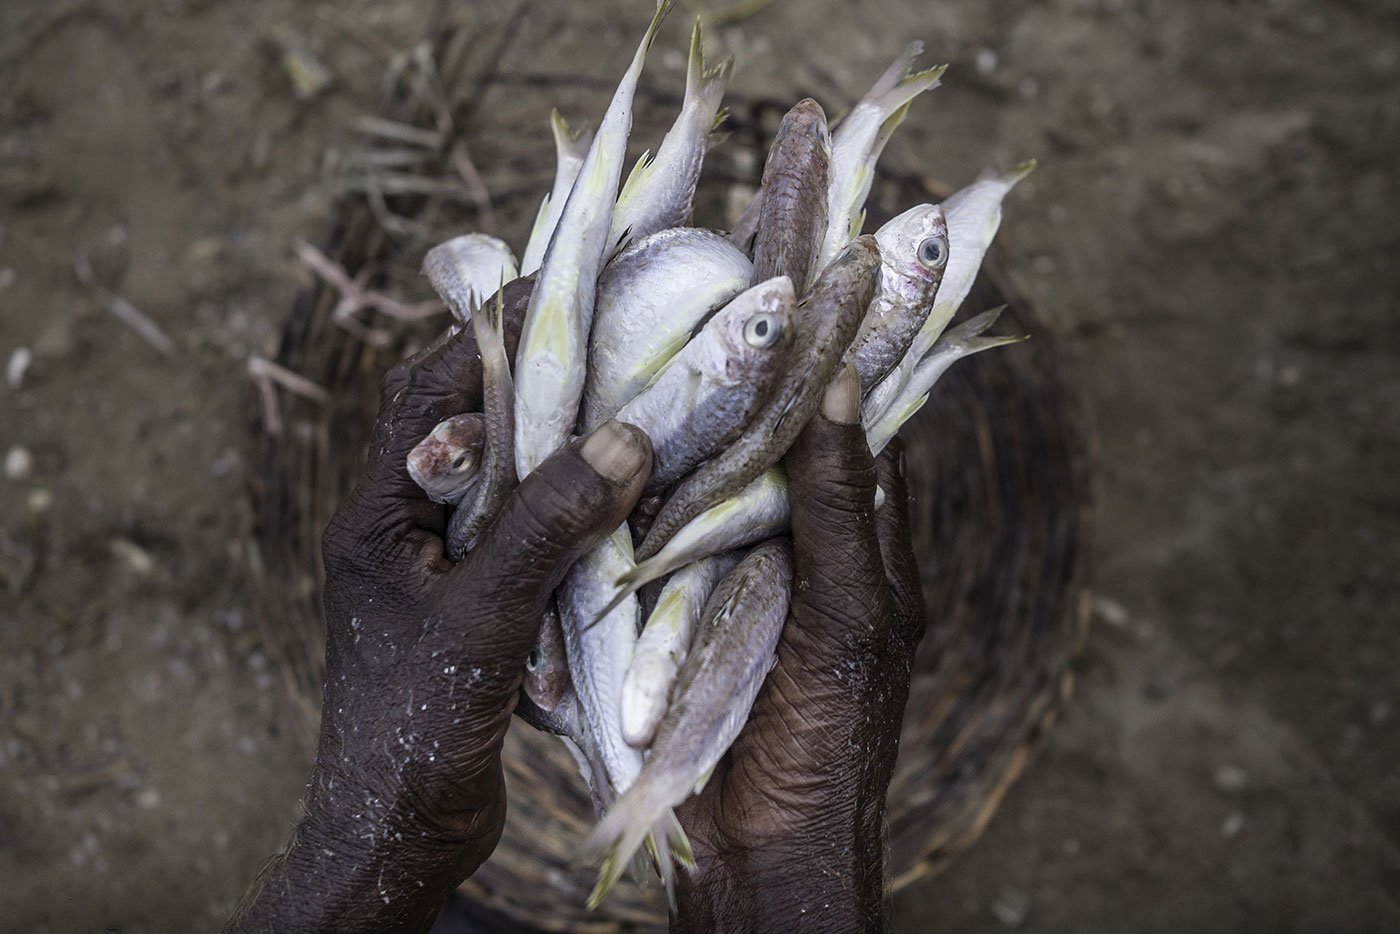 A fisherman's hands full of fish